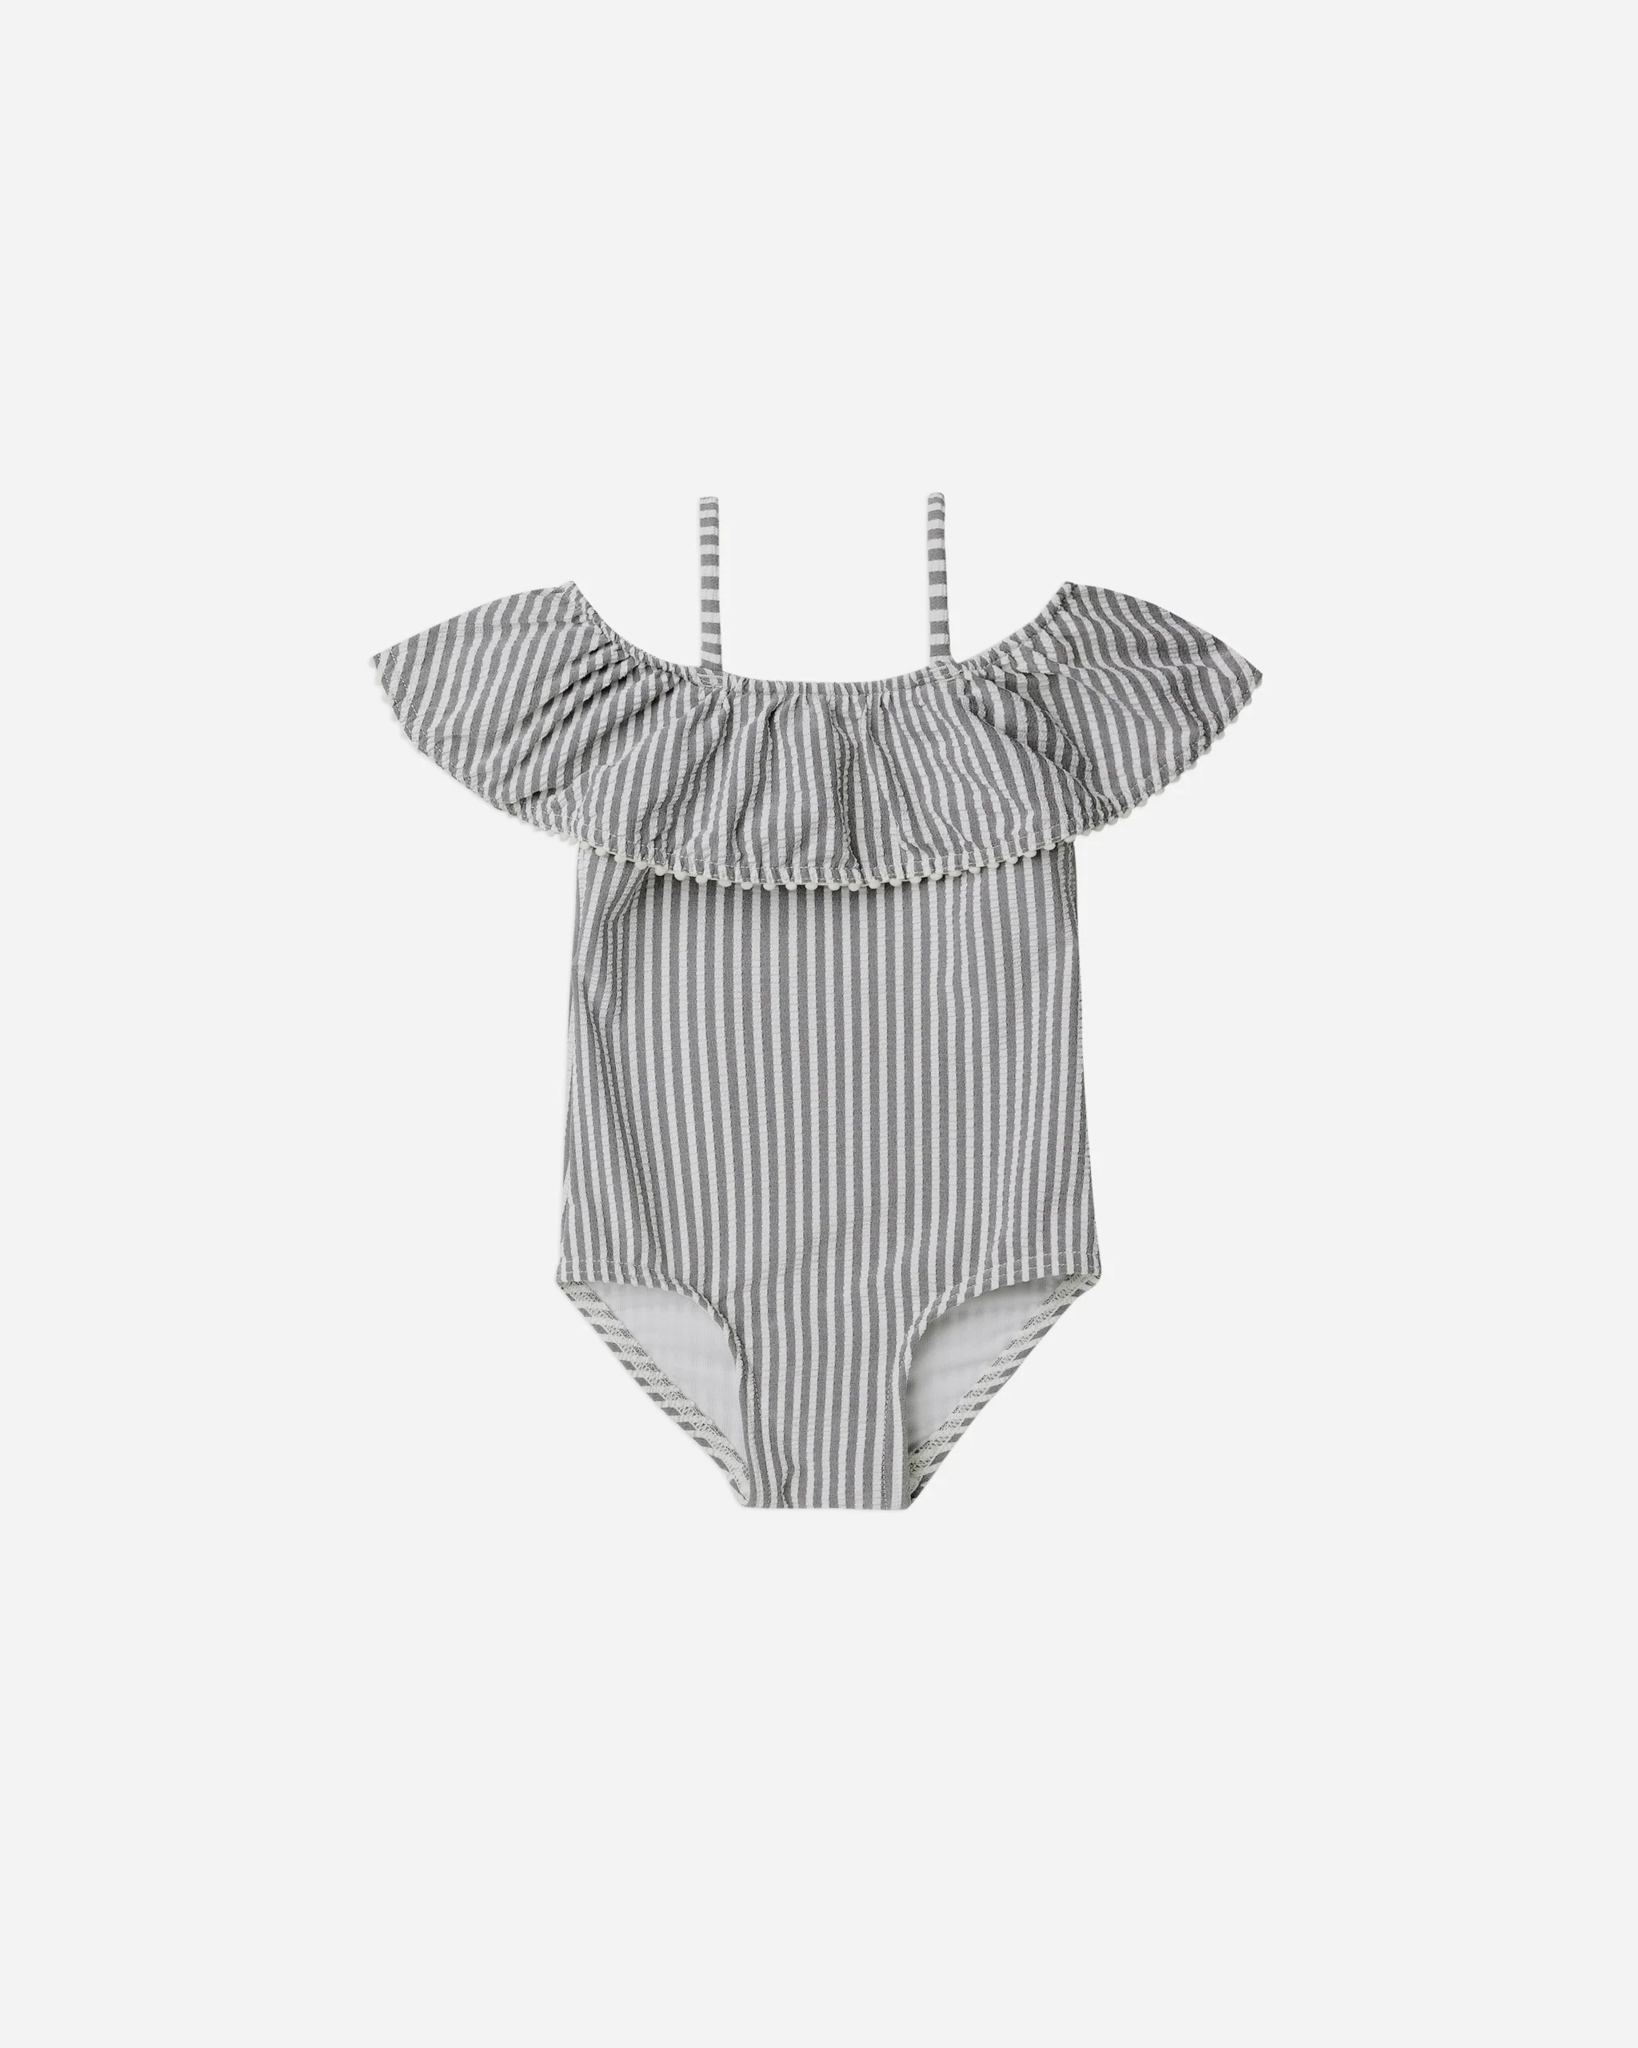 Rylee and Cru Rylee and Cru Off the Shoulder One Piece Swimsuit